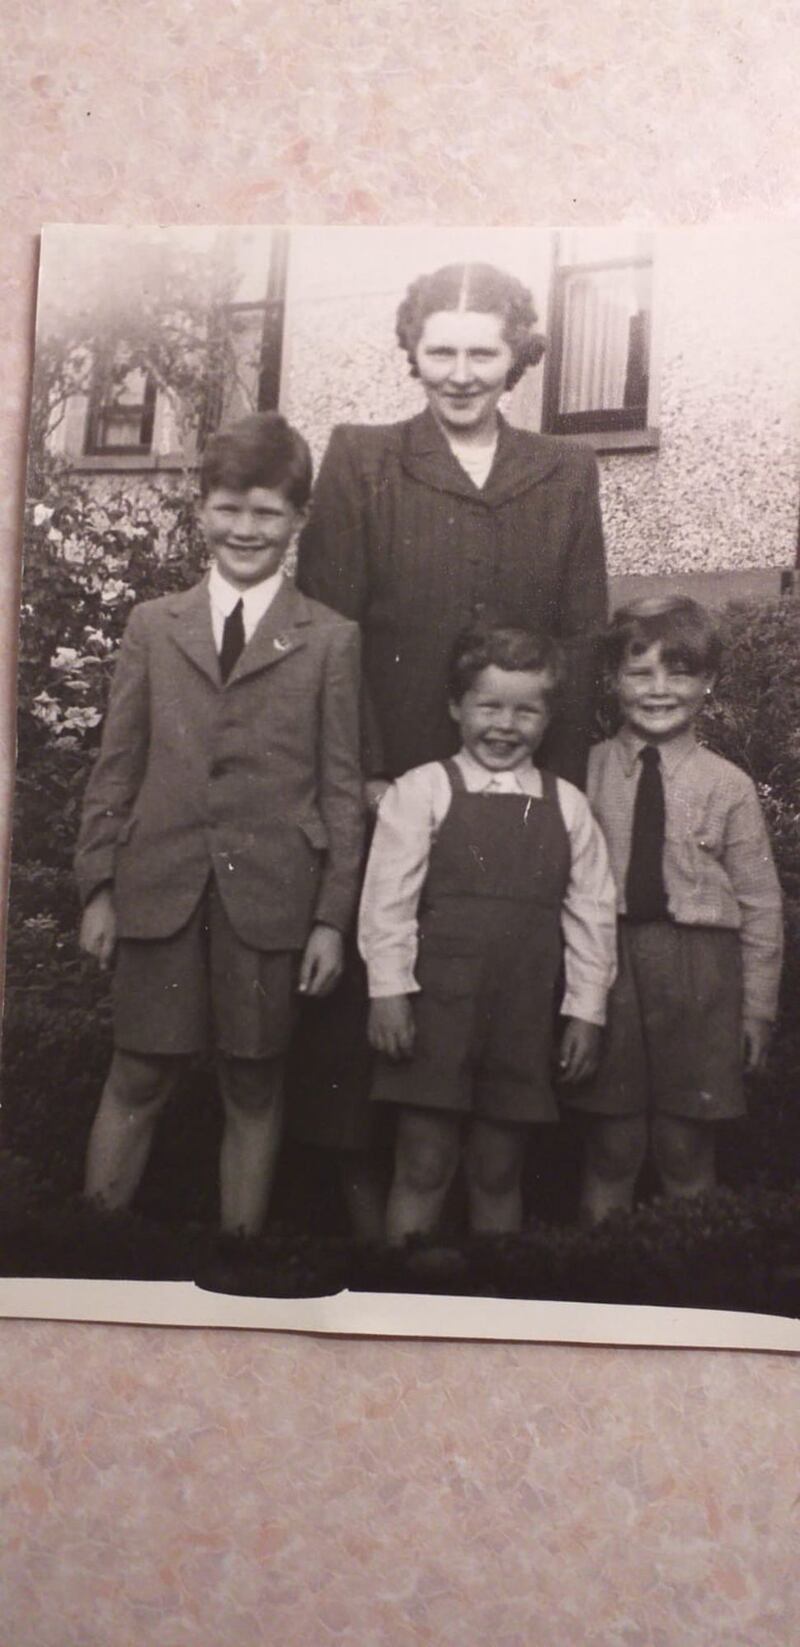 Adrian with his mother and brothers John and Derek in 1948